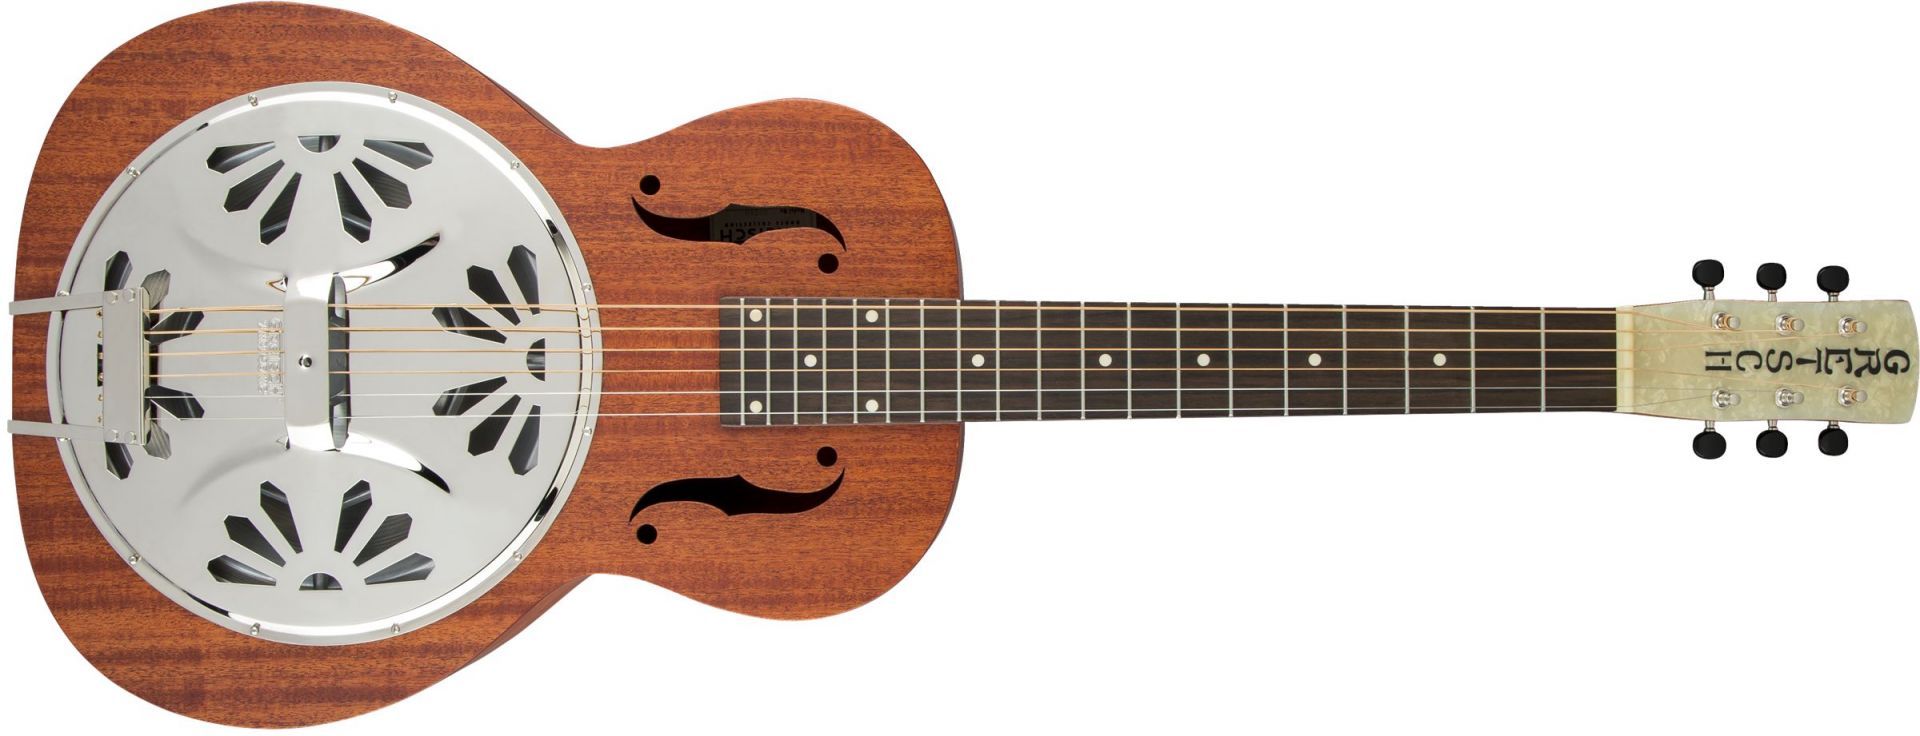 Gretsch Guitars G9210 Boxcar Square-Neck Natural